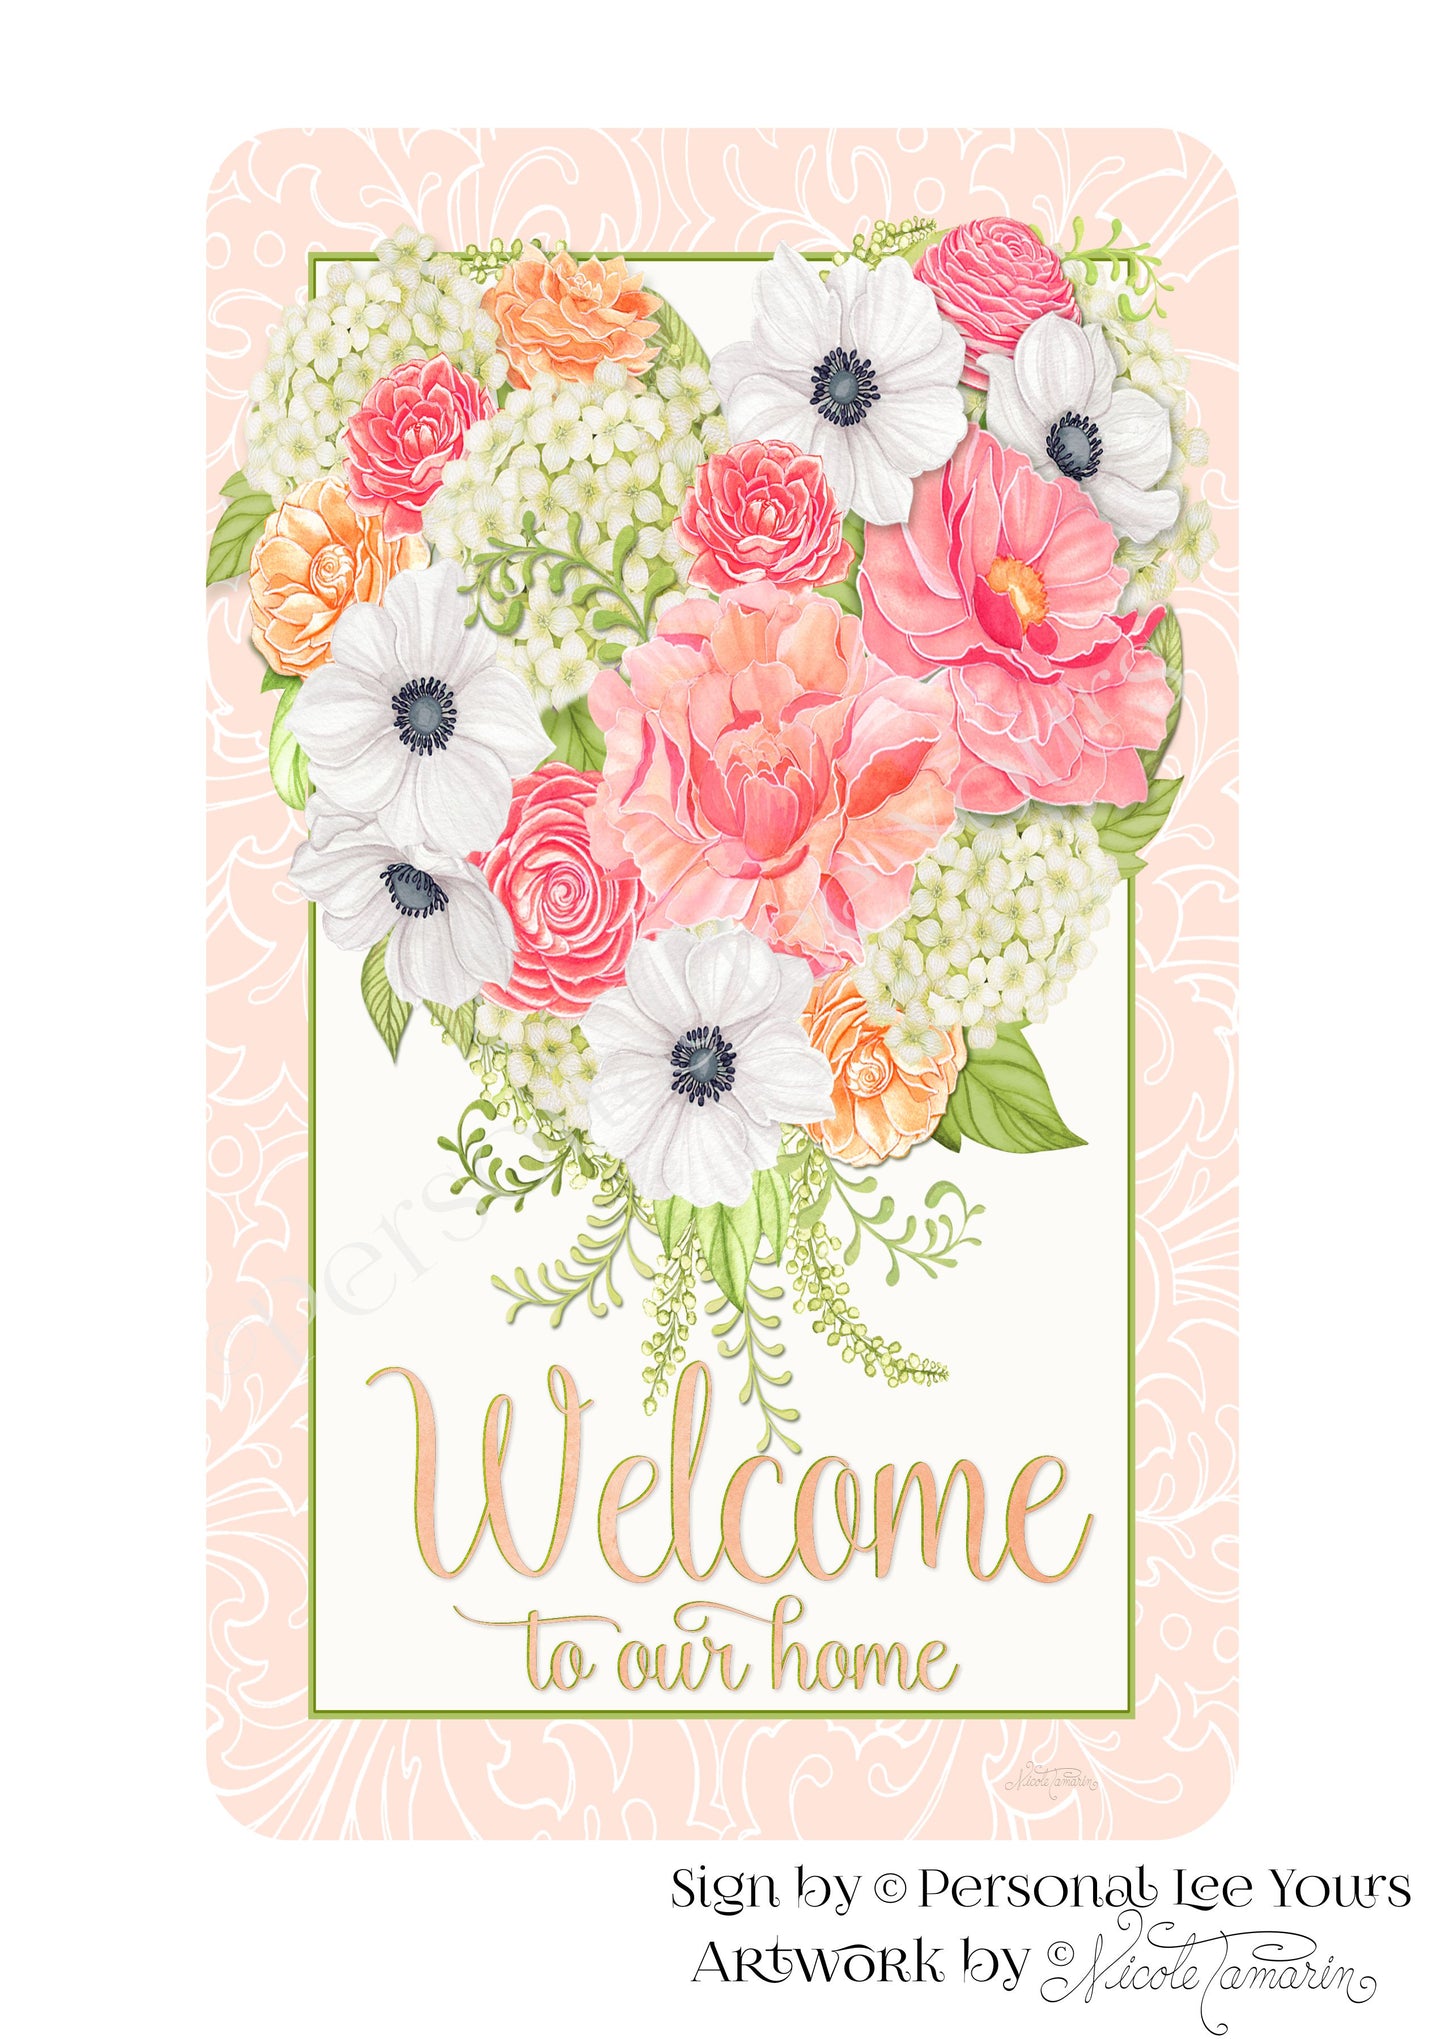 Nicole Tamarin Exclusive Sign * Floral Heart Welcome * Vertical * 4 Sizes * Lightweight Metal